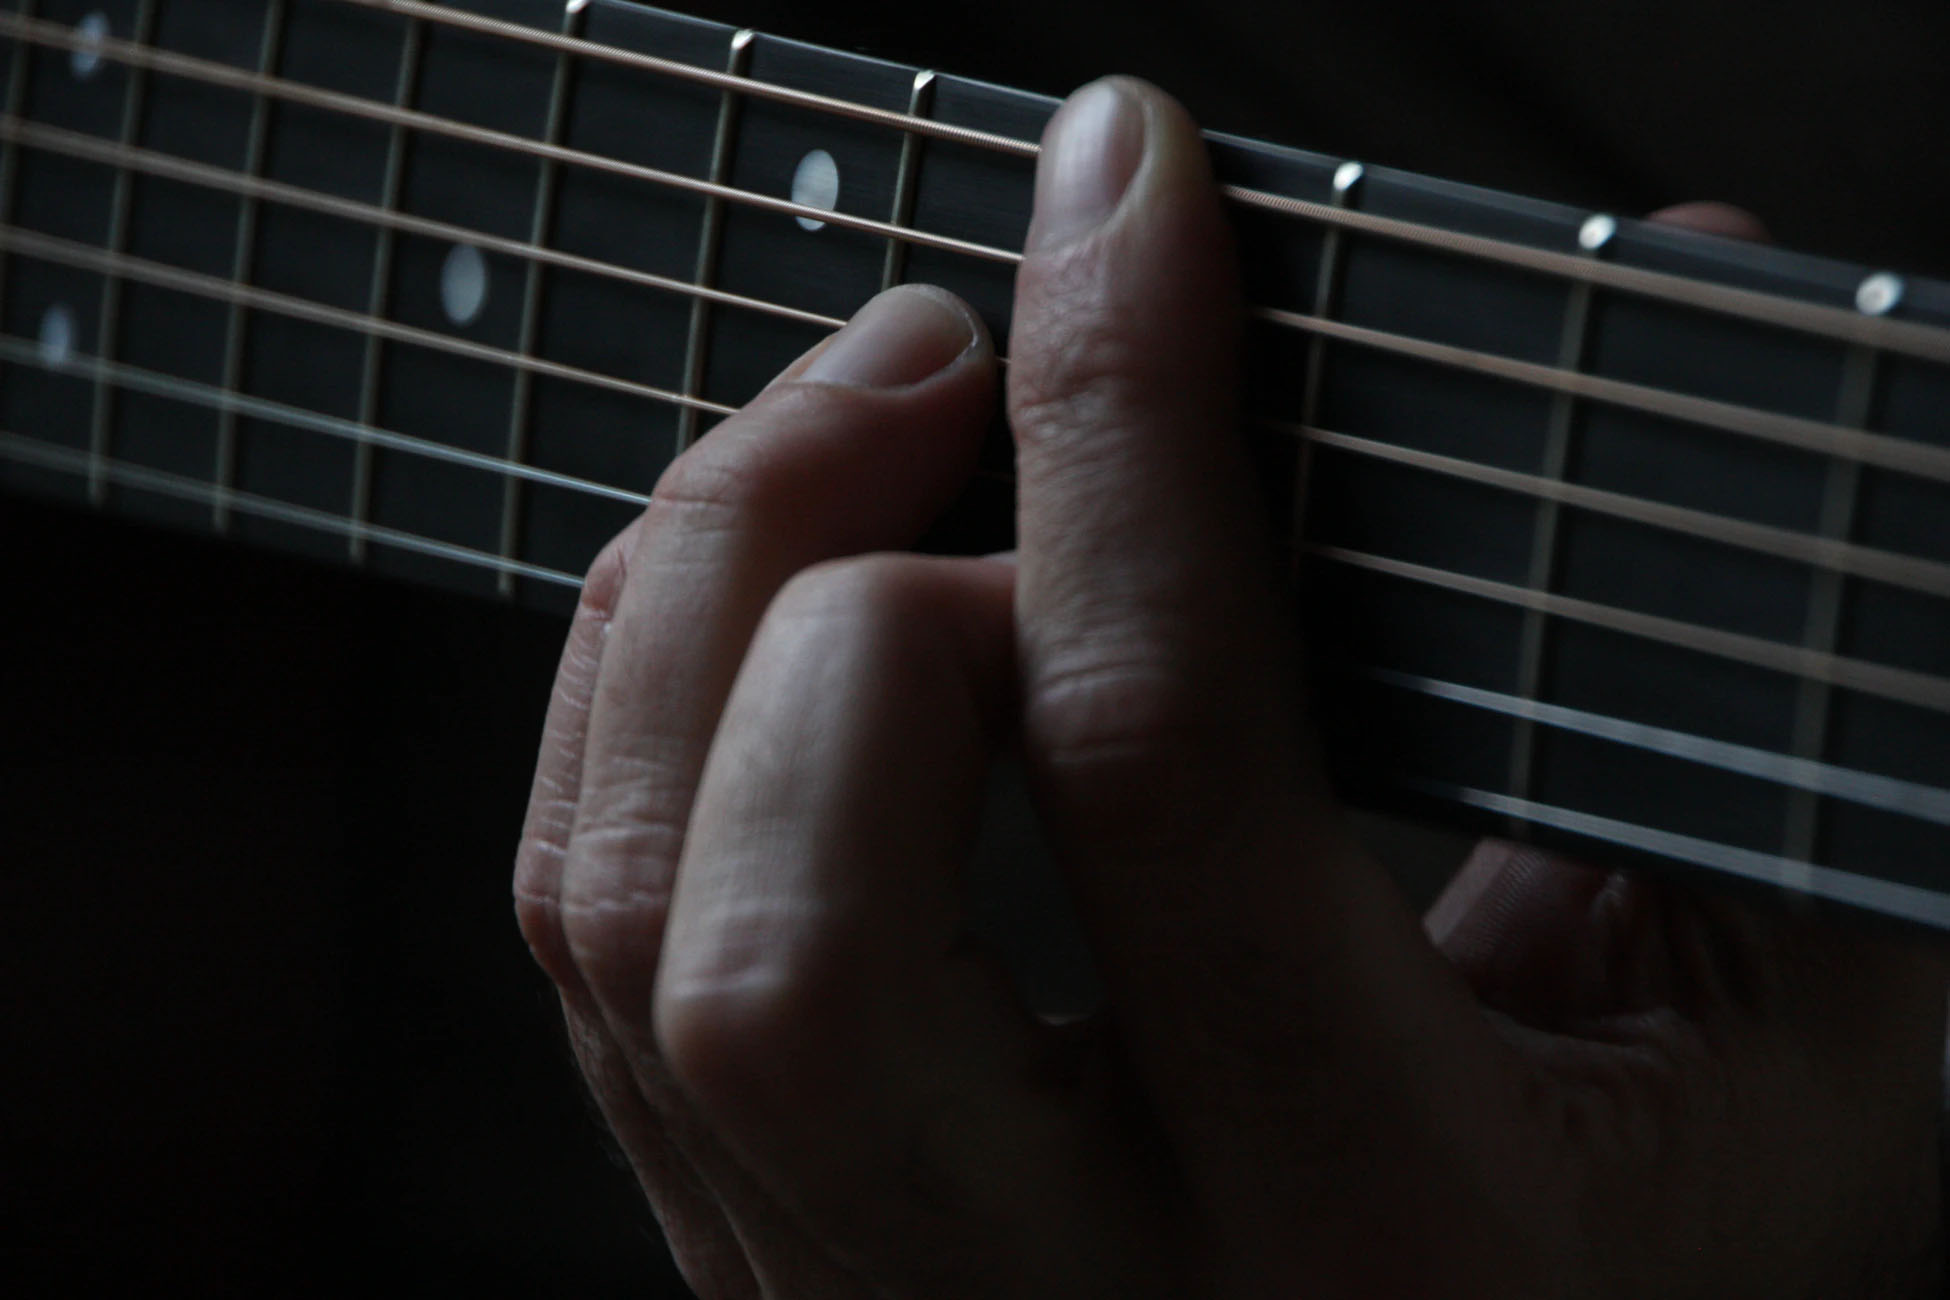 Image of fingers on guitar strings